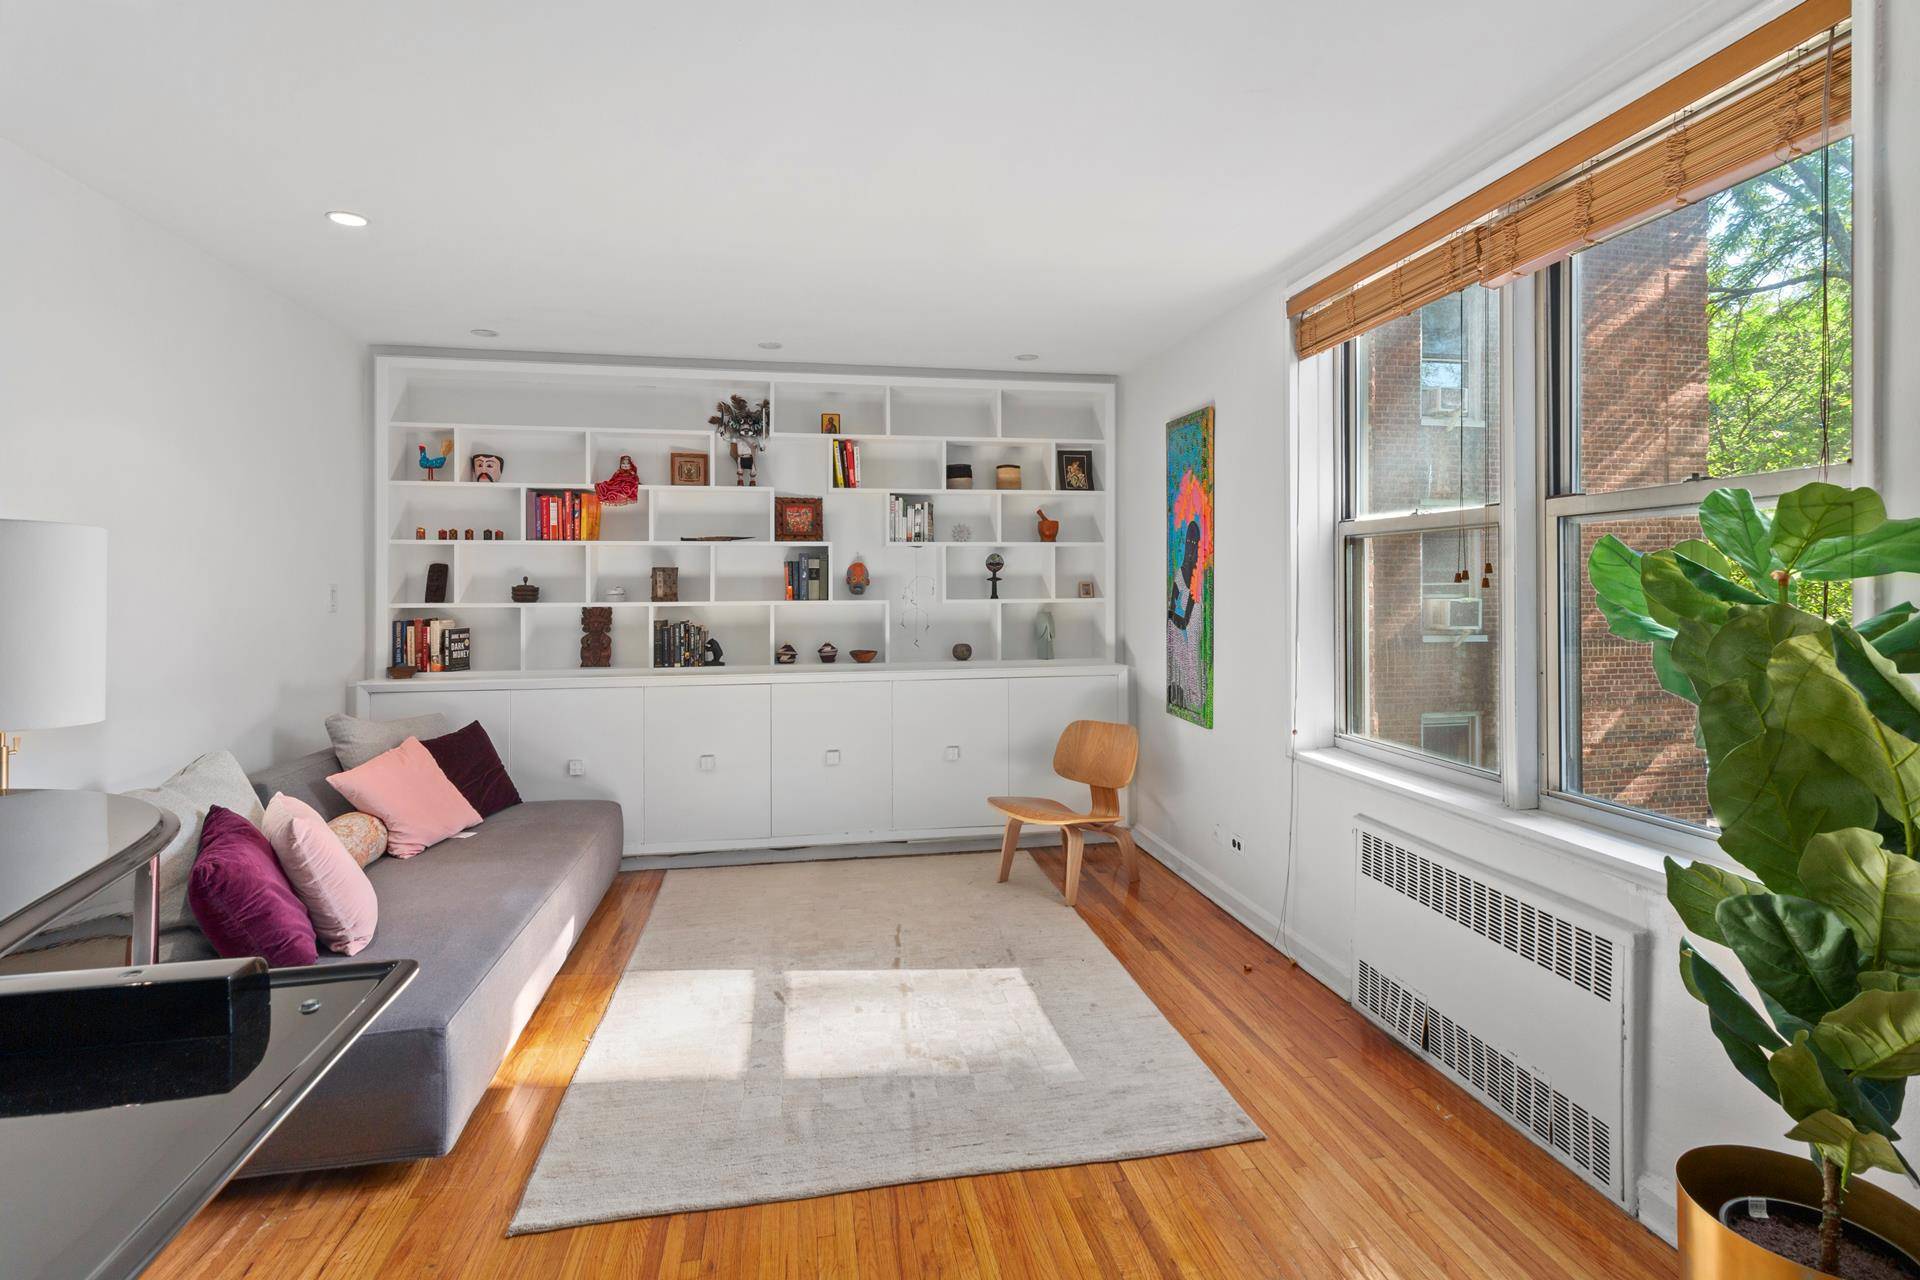 Walk into your next dream home nestled away in this gorgeous corner of Windsor Terrace.